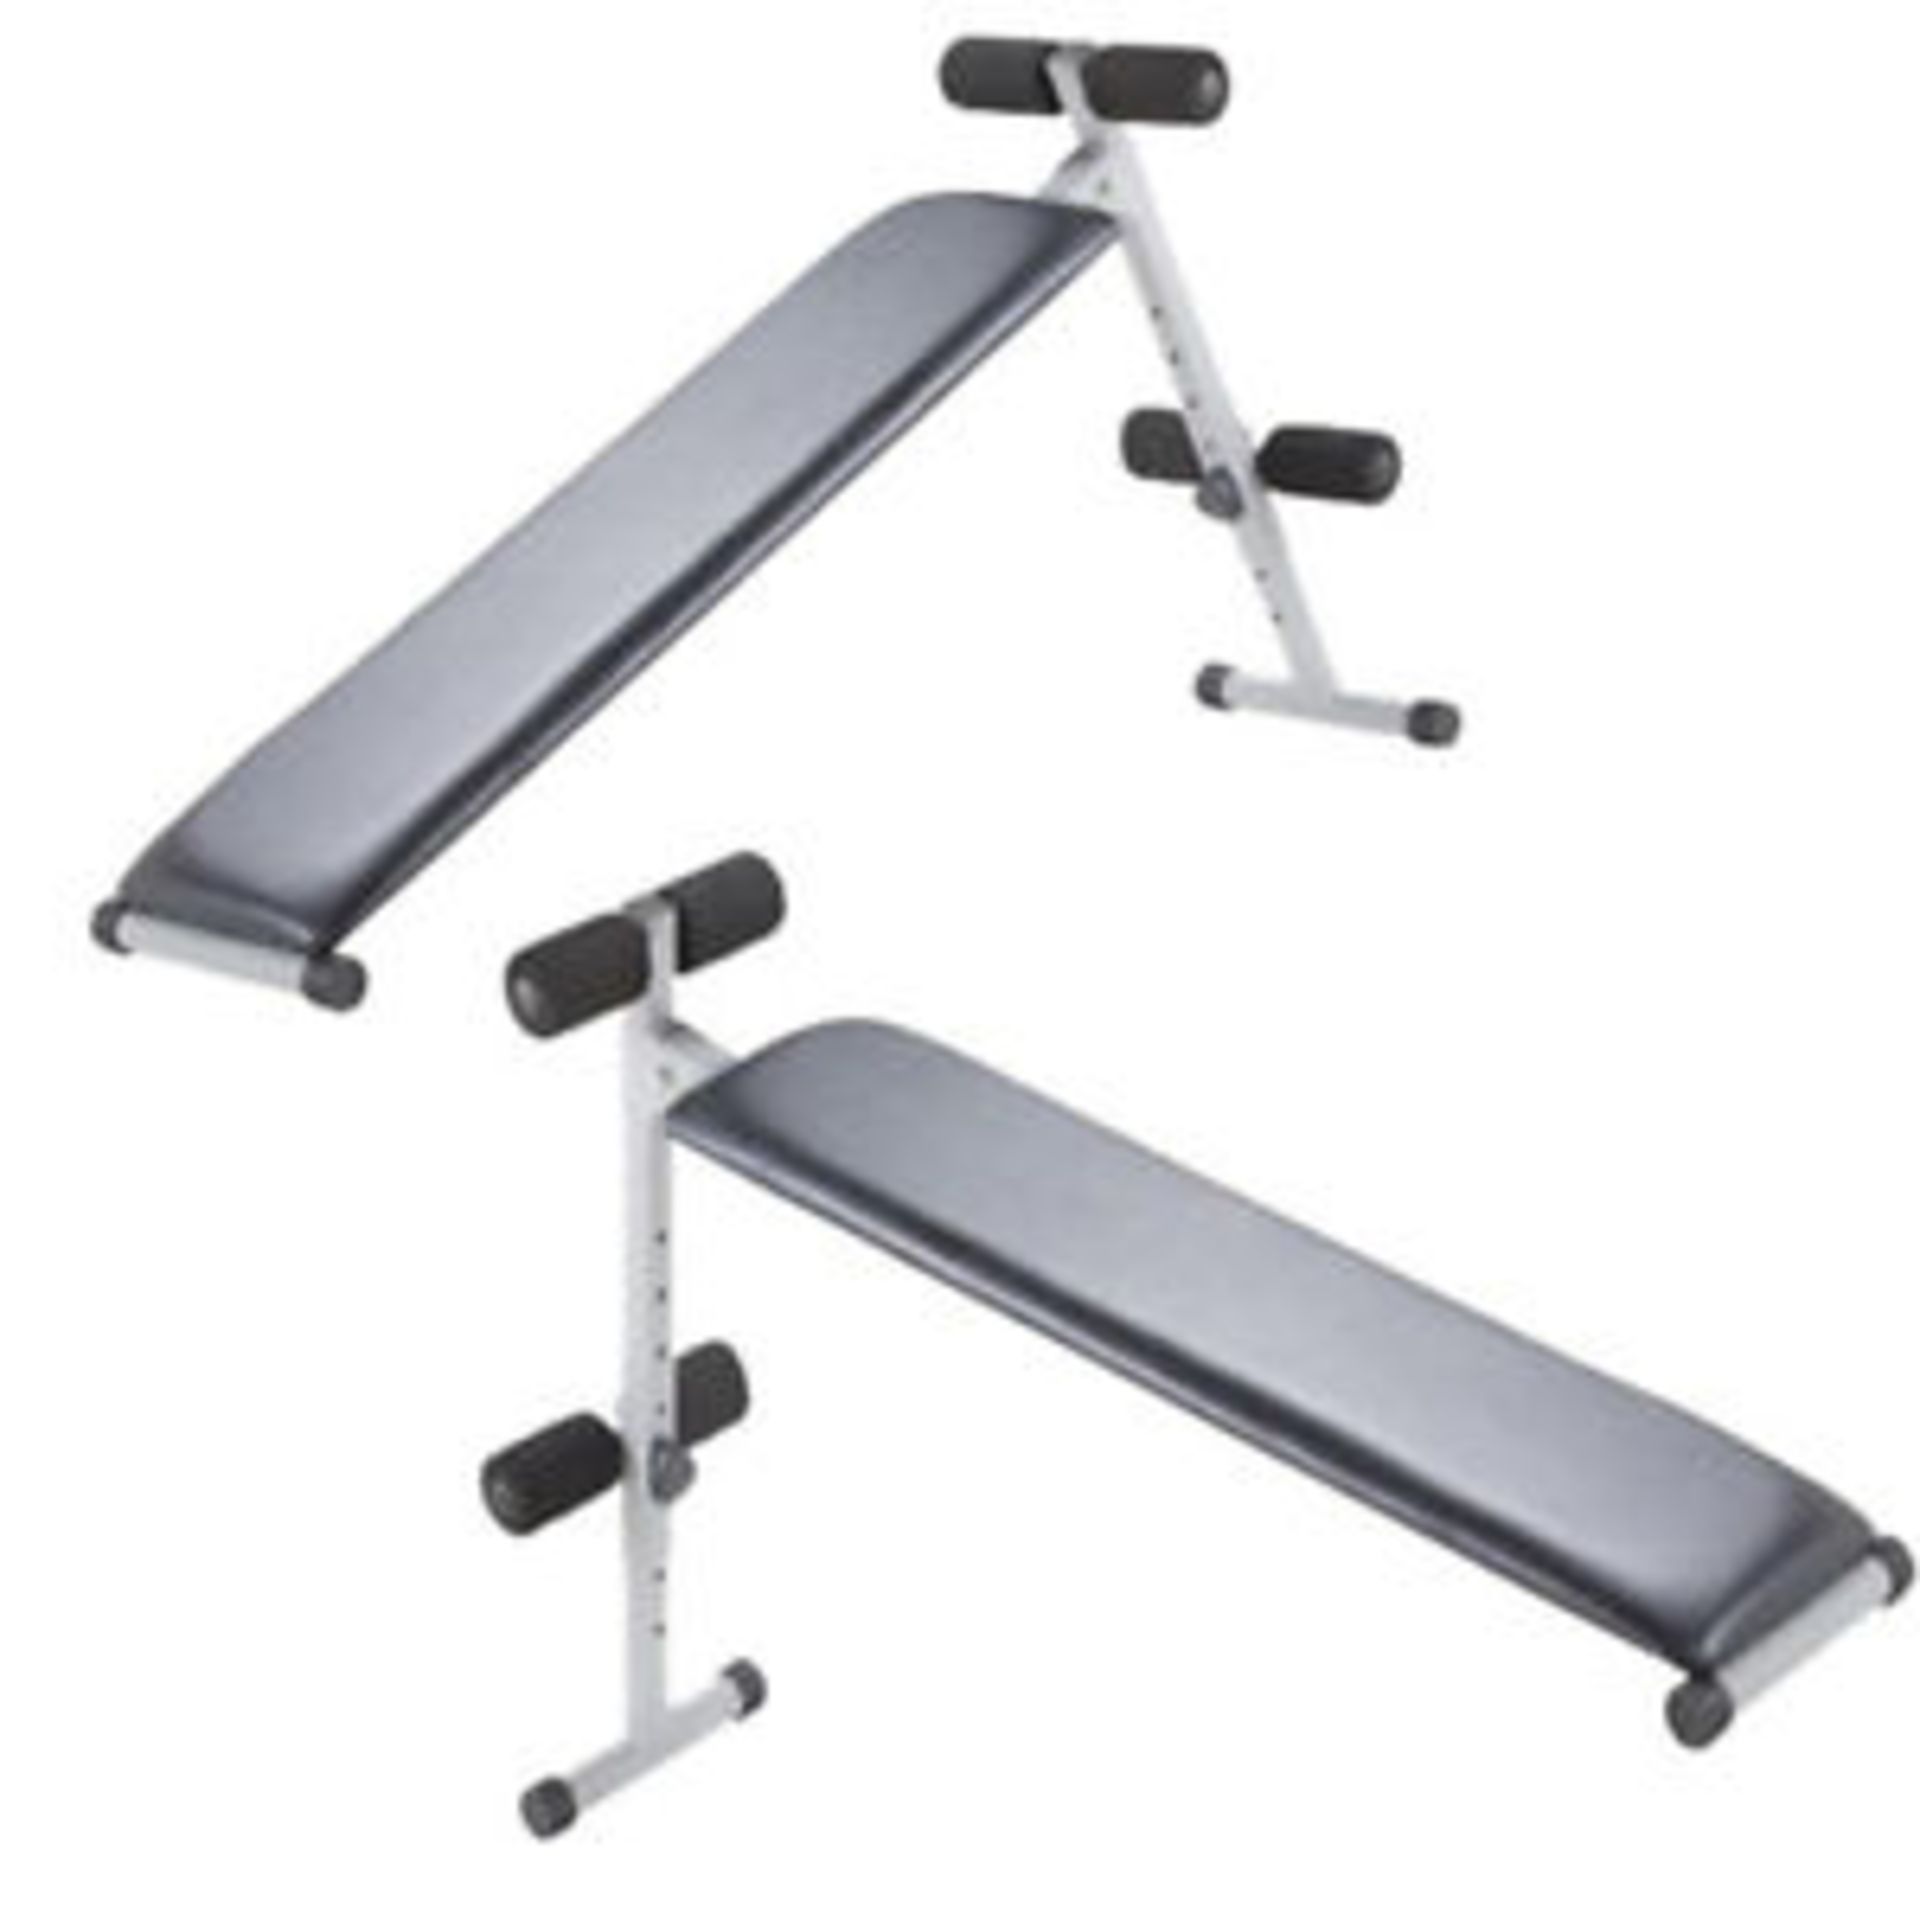 V Brand New 2 in 1 Incline/Sit Up Bench - Tesco Price £35.00 - Image 3 of 6